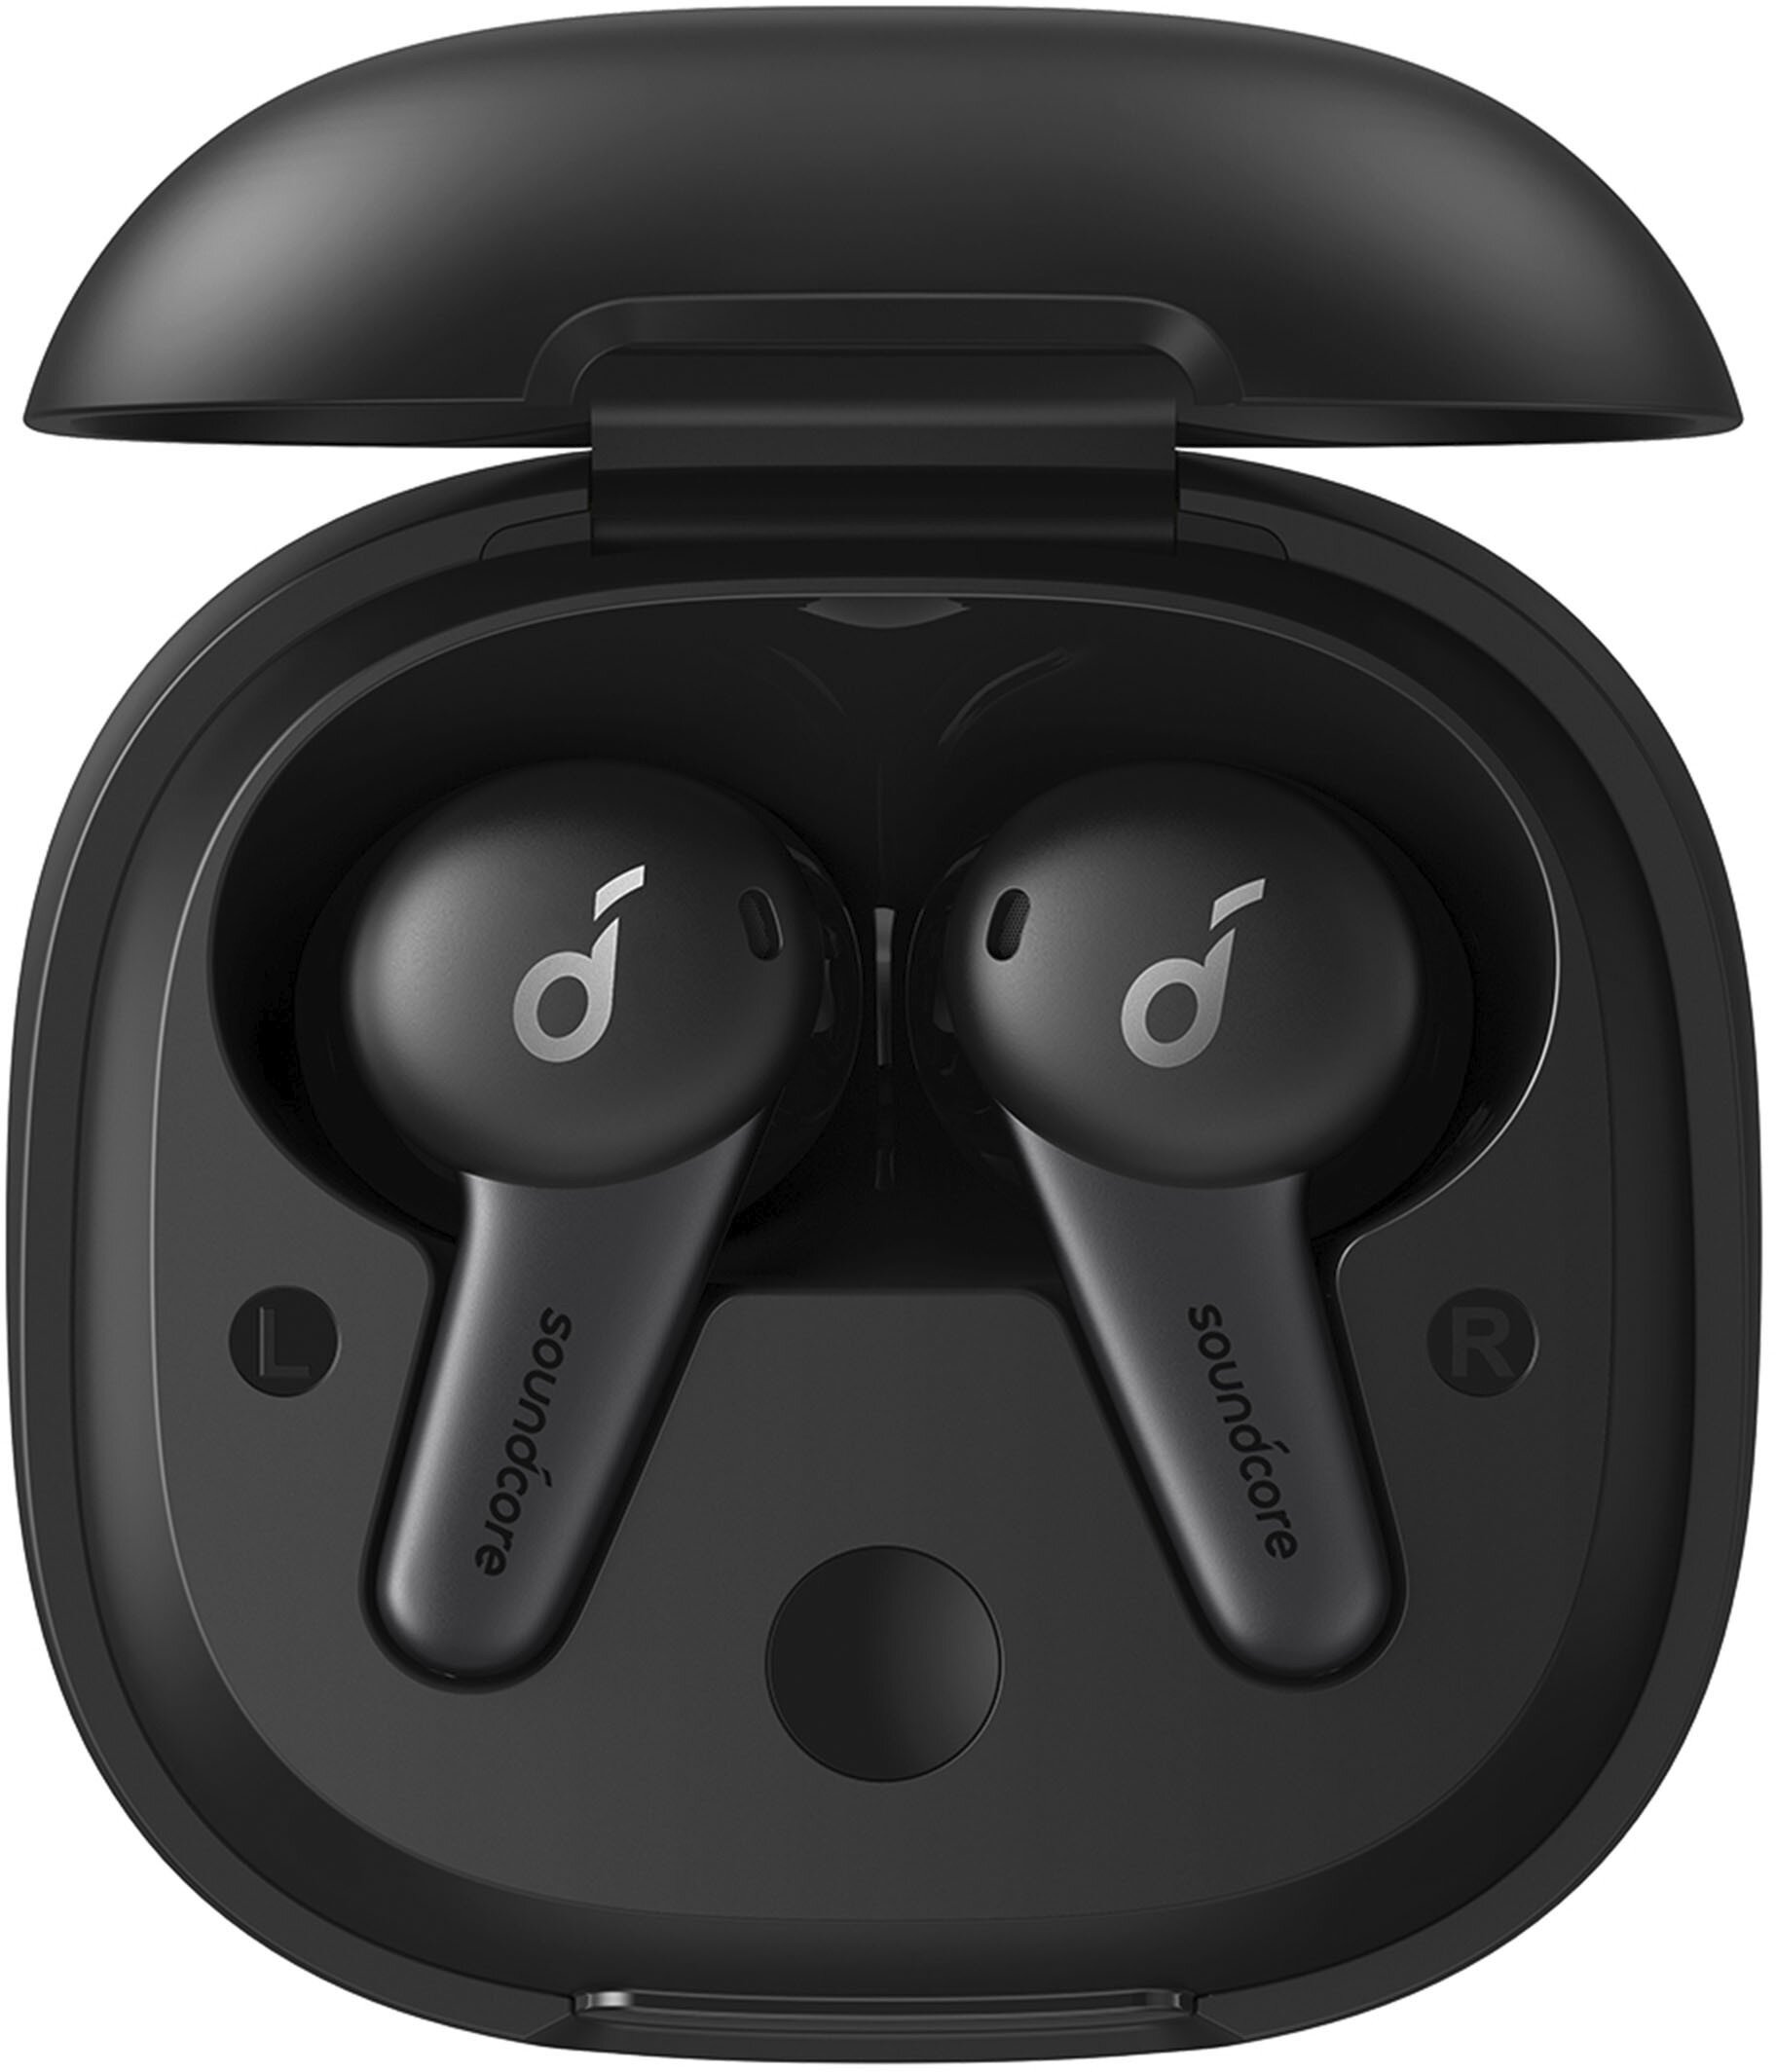 soundcore life note c earbuds